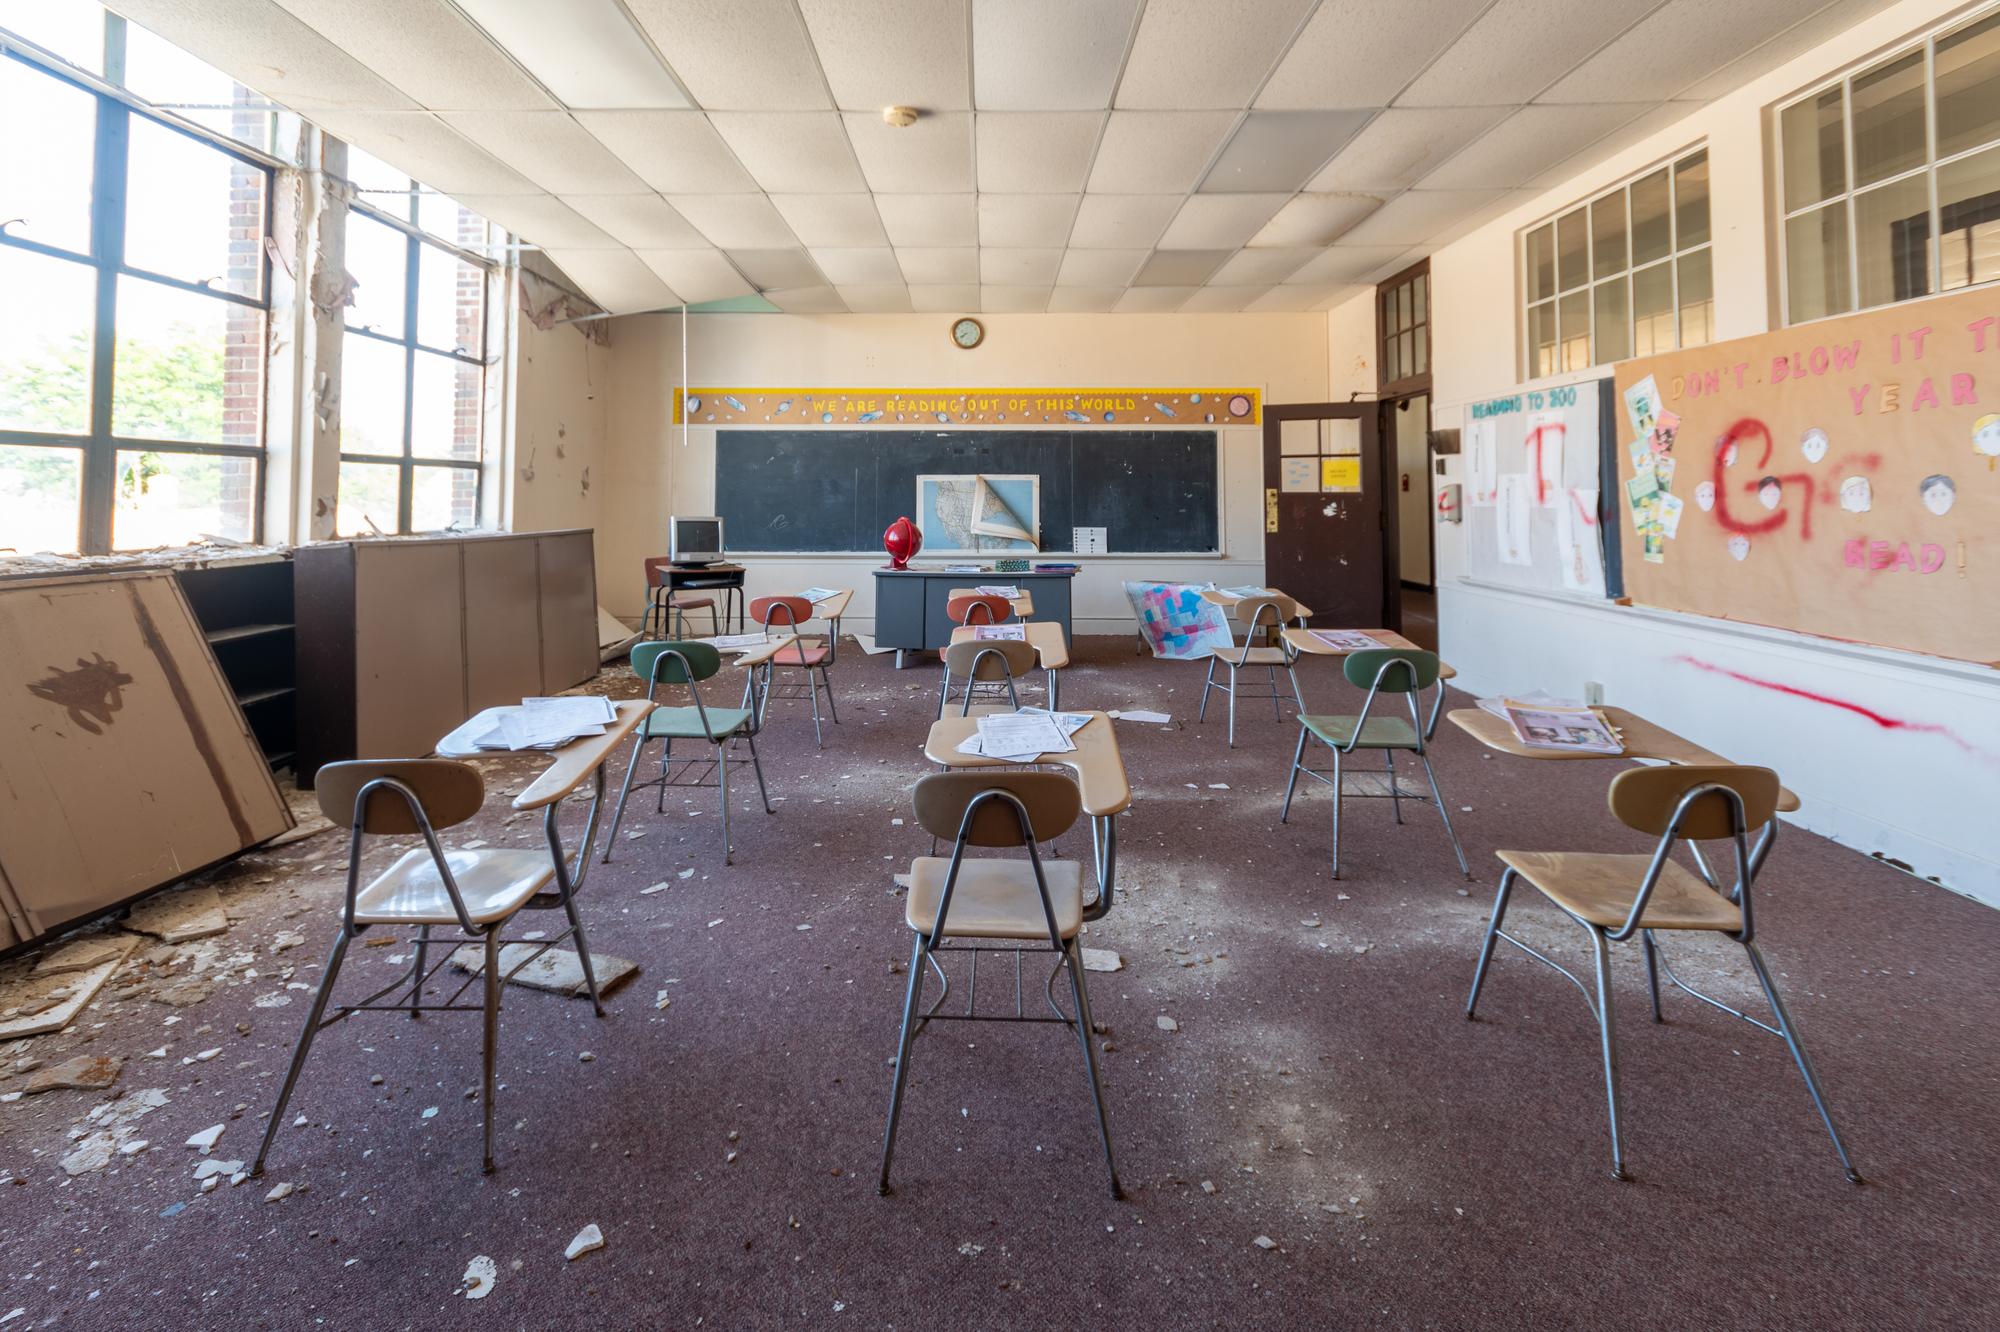 I Had the Police Called on me at an Abandoned School